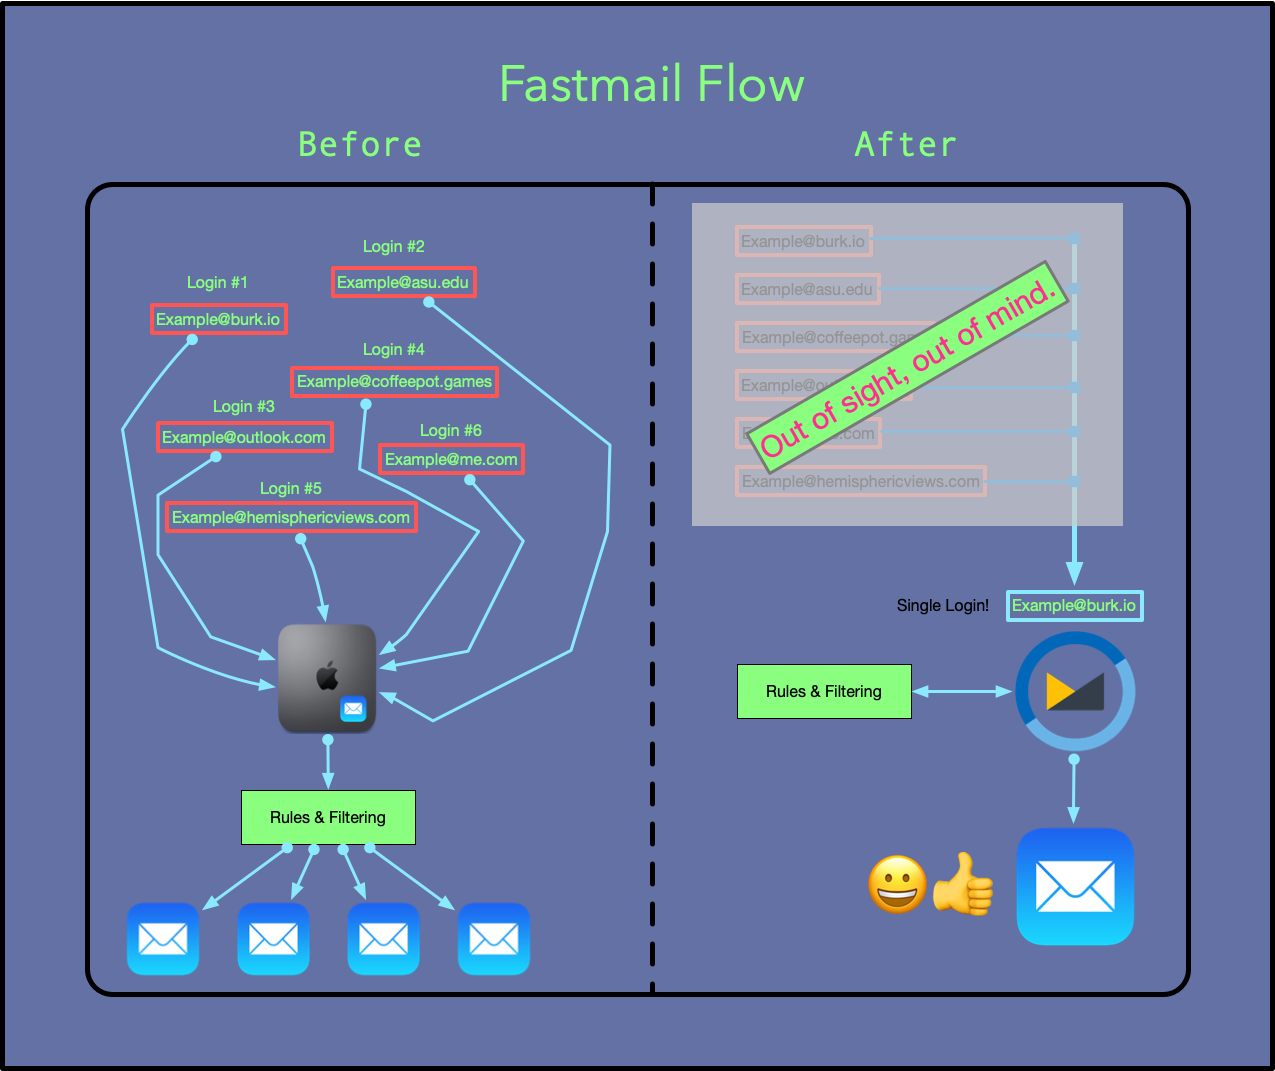 Fastmail Flow